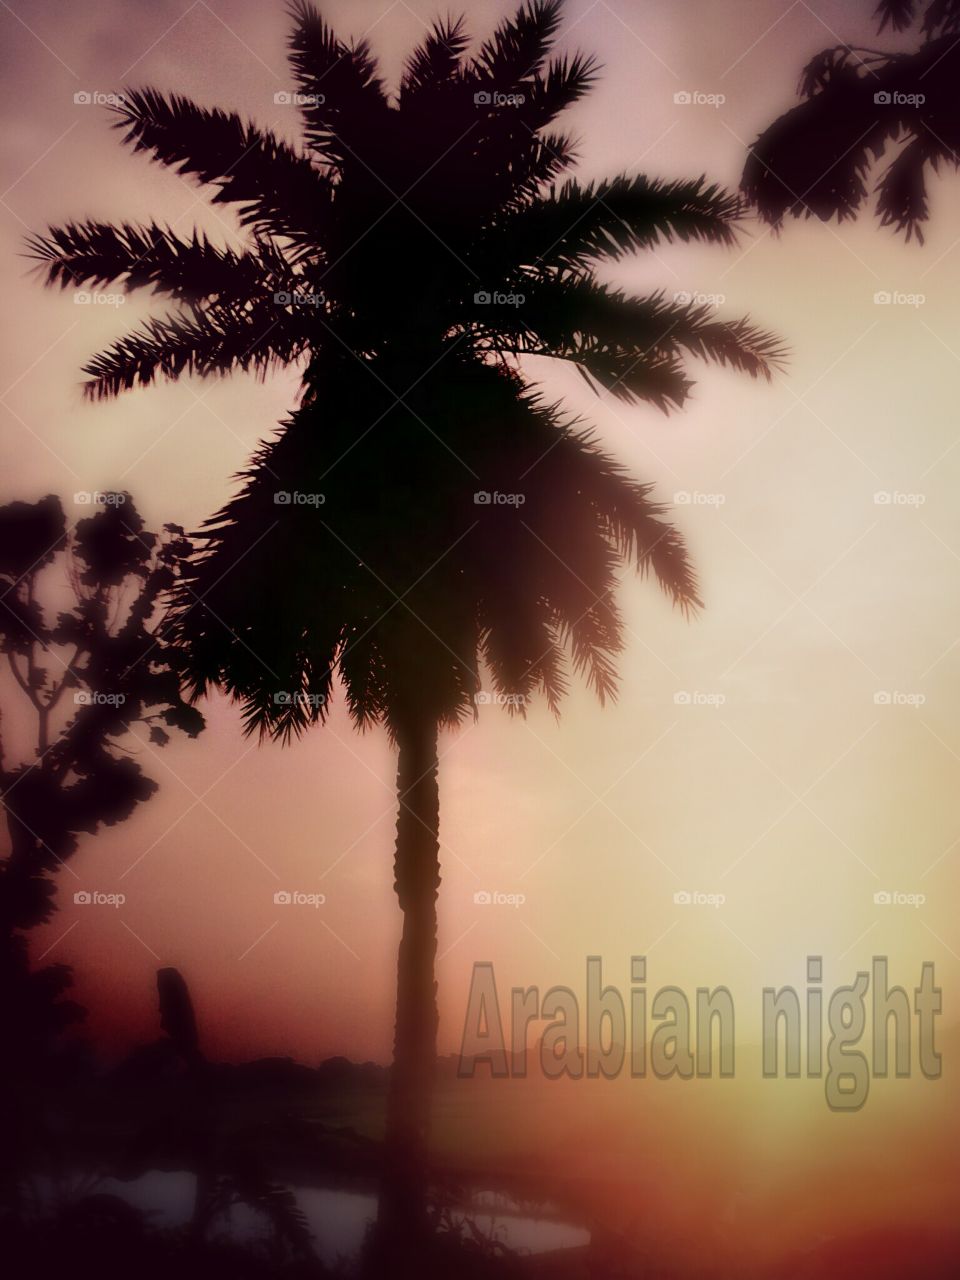 Scenery Middle Easterner
It is very nice scenery place in Arab. Middle easterner is really beautiful scenery .